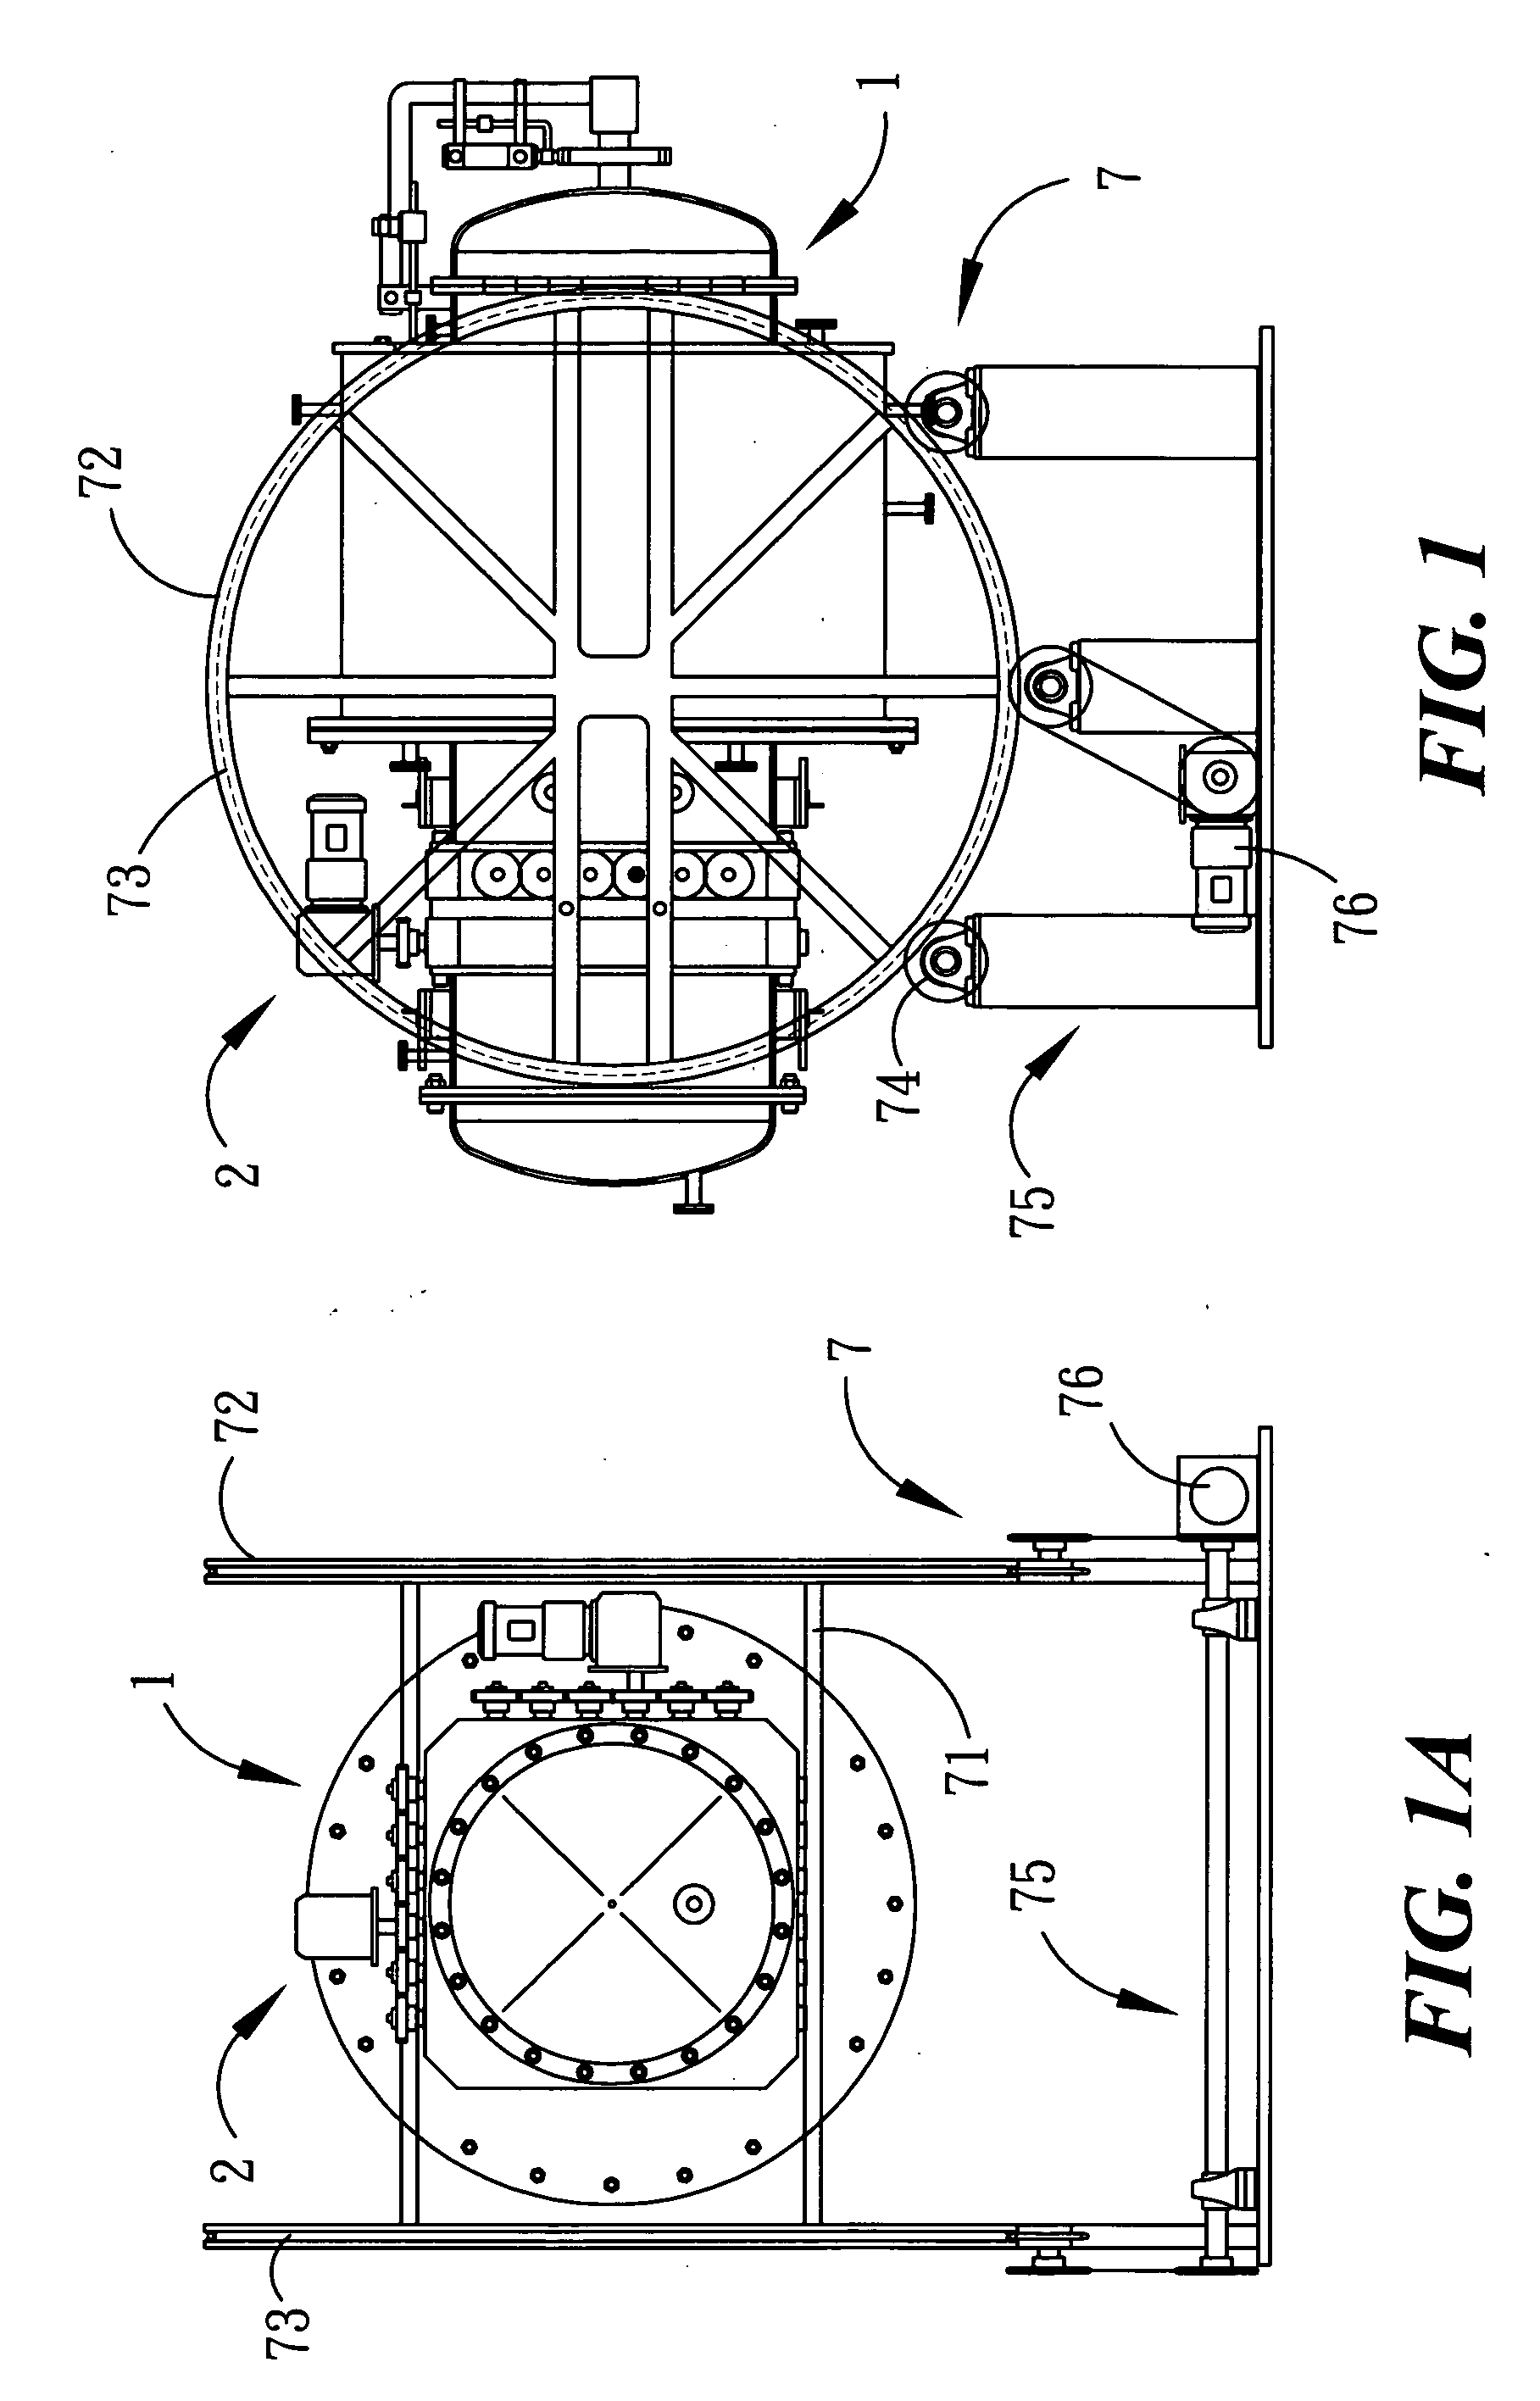 Reciprocating autoclave with internal cutters (RAIC) and method for treatment of medical waste